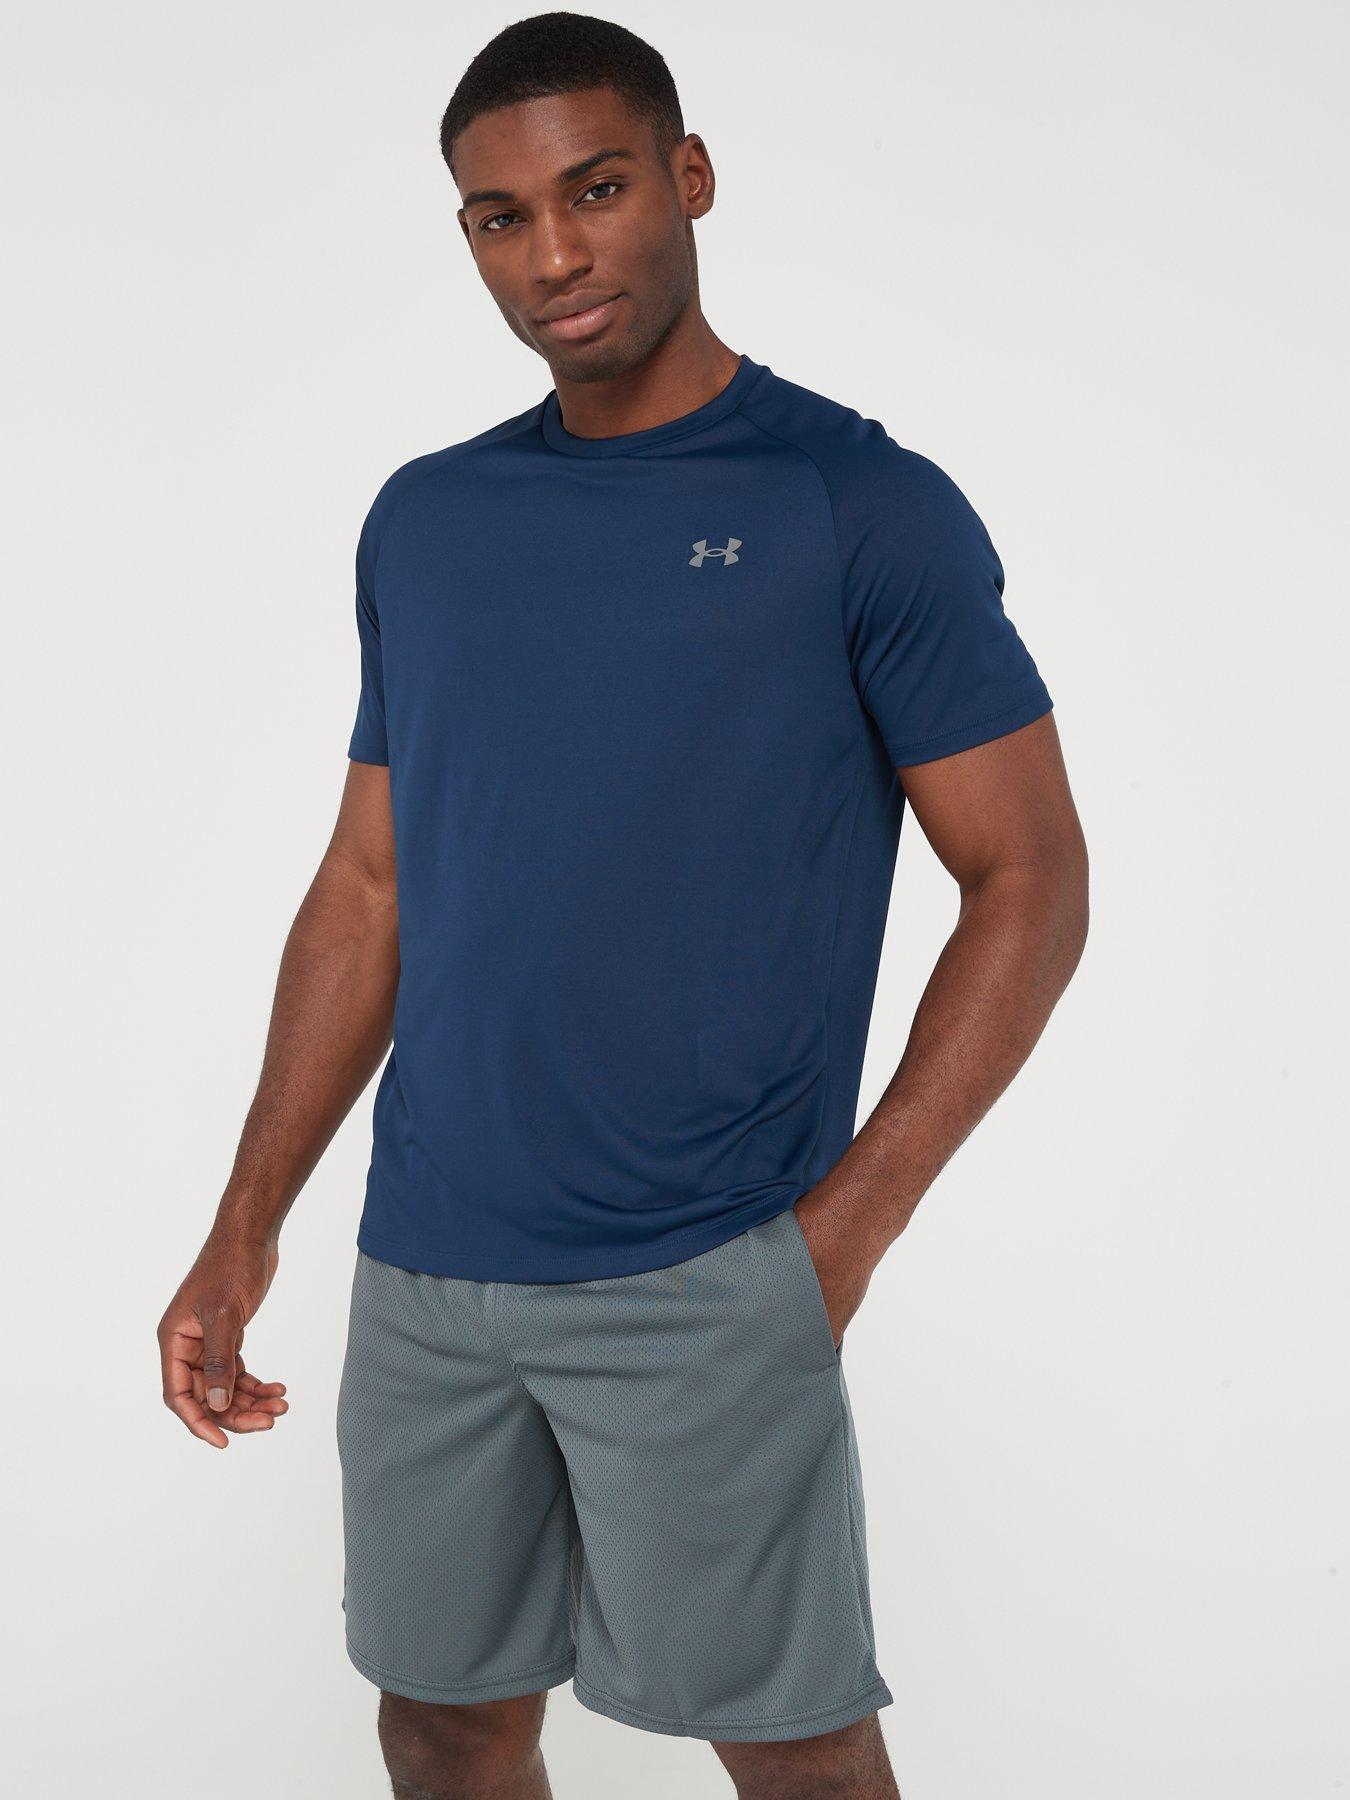 armour | T-shirts & polos | Mens sports clothing | Sports & leisure | www.very.co.uk